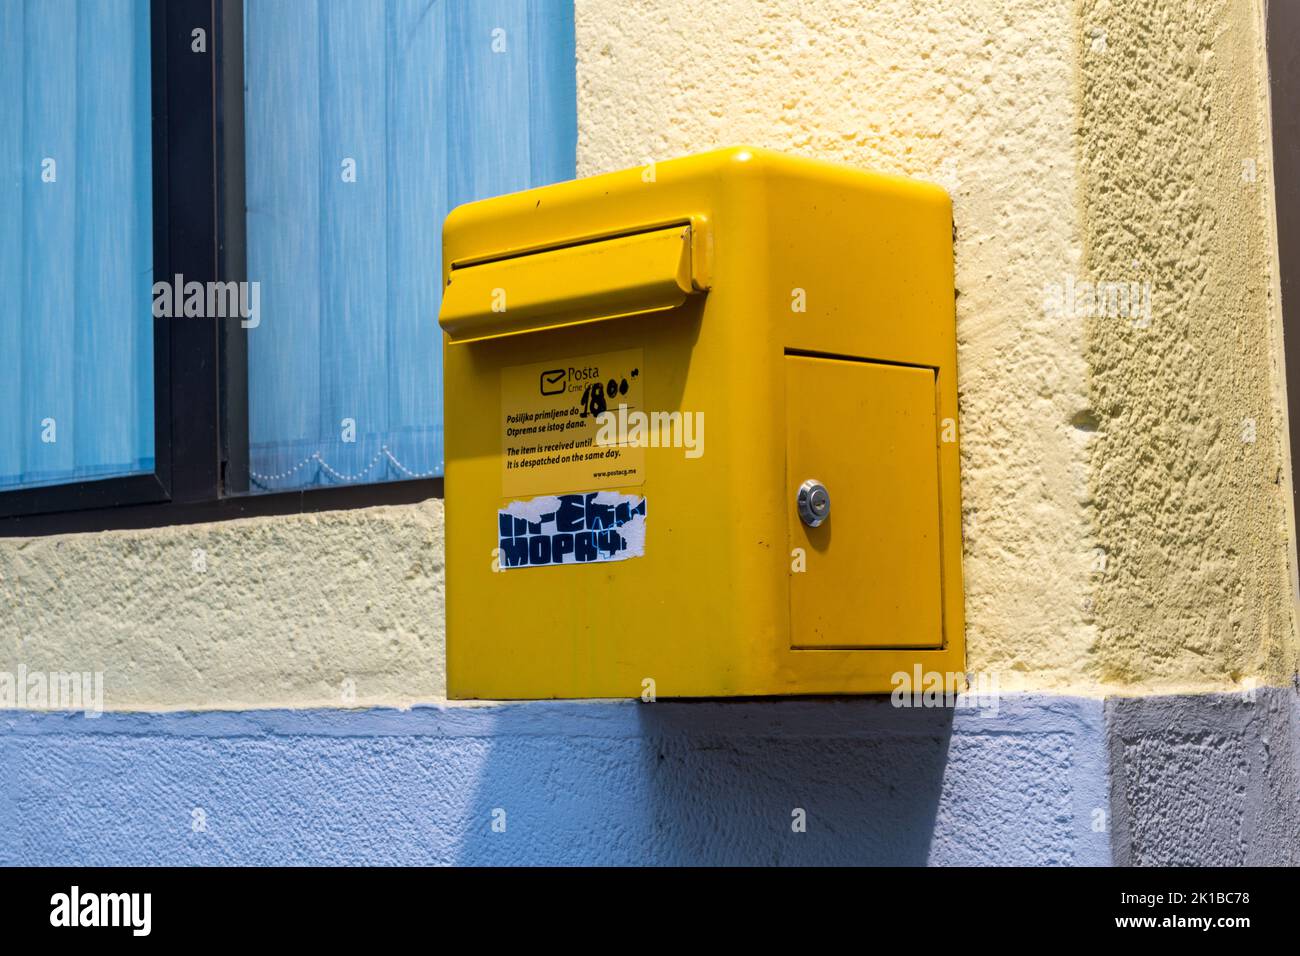 Podgorica, Montenegro - June 4, 2022: Mail box of Post Crne Gore (Post of Montenegro) at post office. Stock Photo